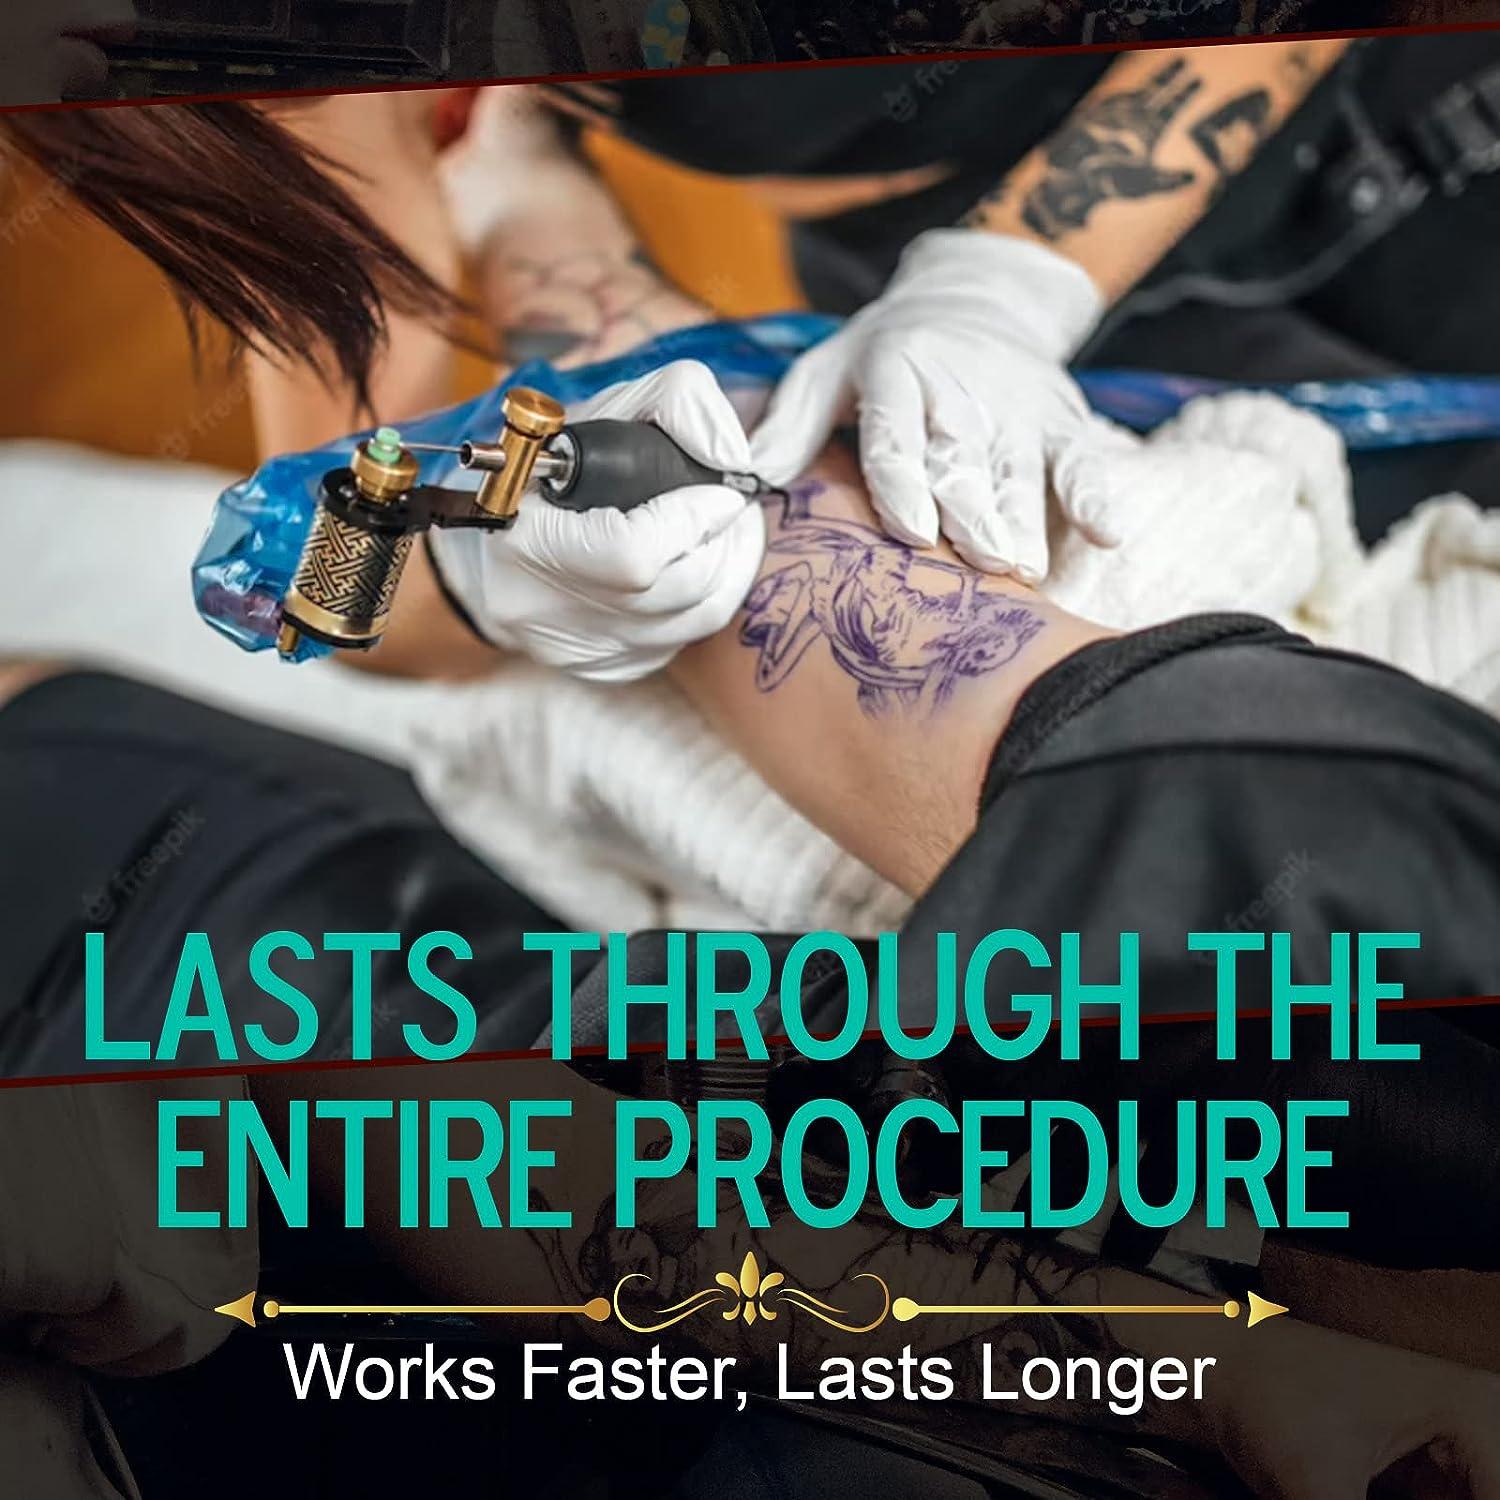 Getting a tattoo can now be painless — and without needles